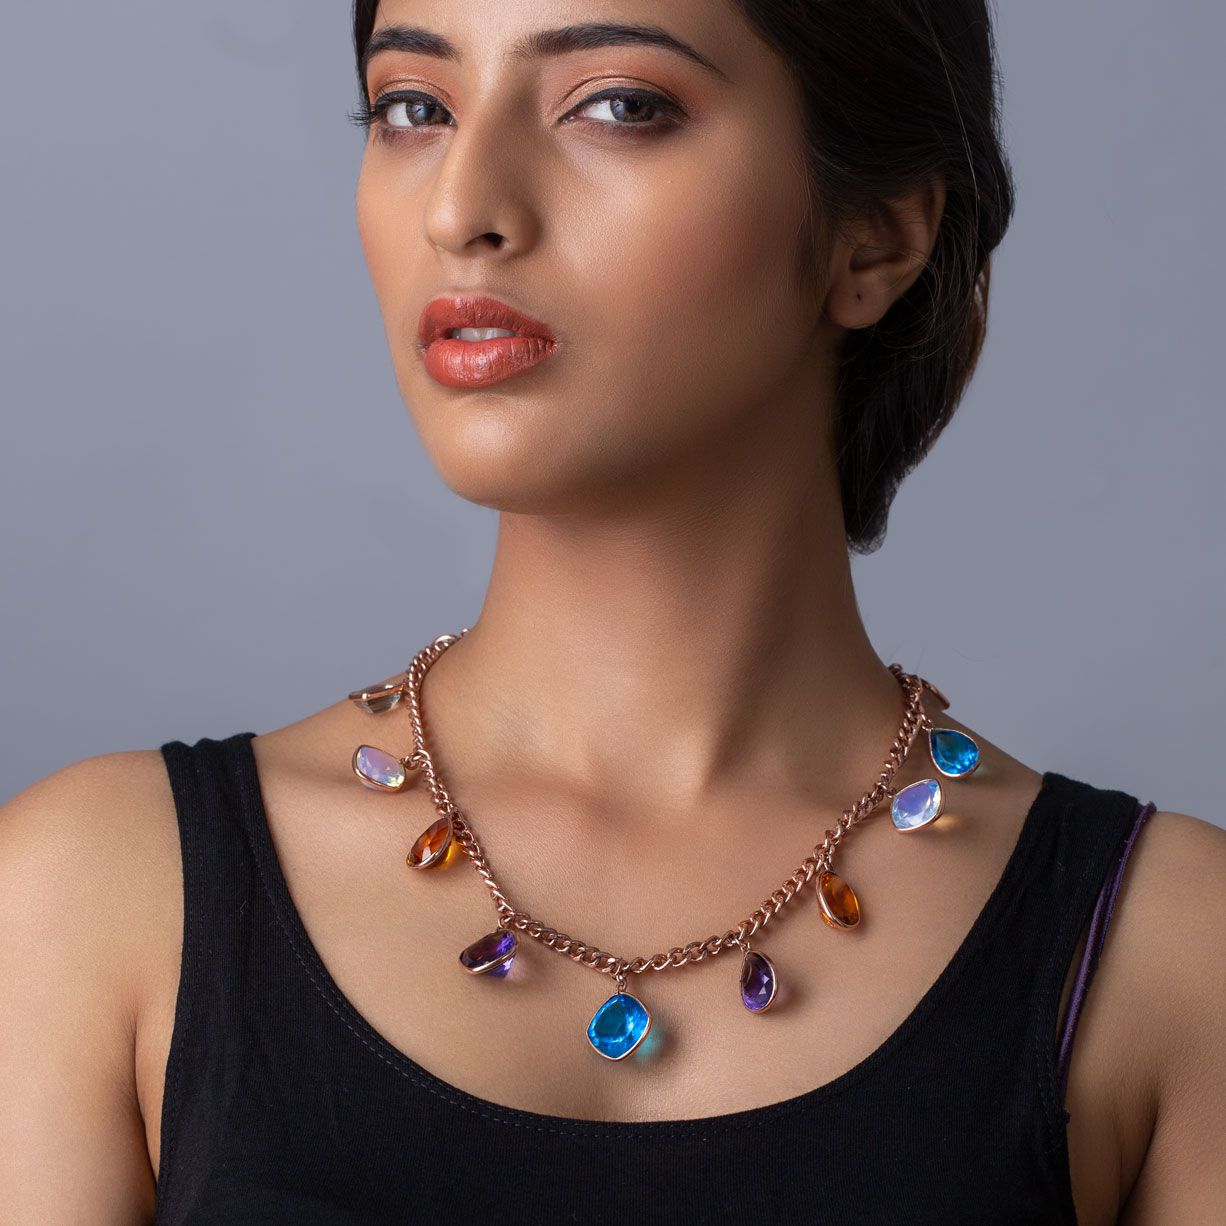 Tips to keep your fashion jewellery rust free